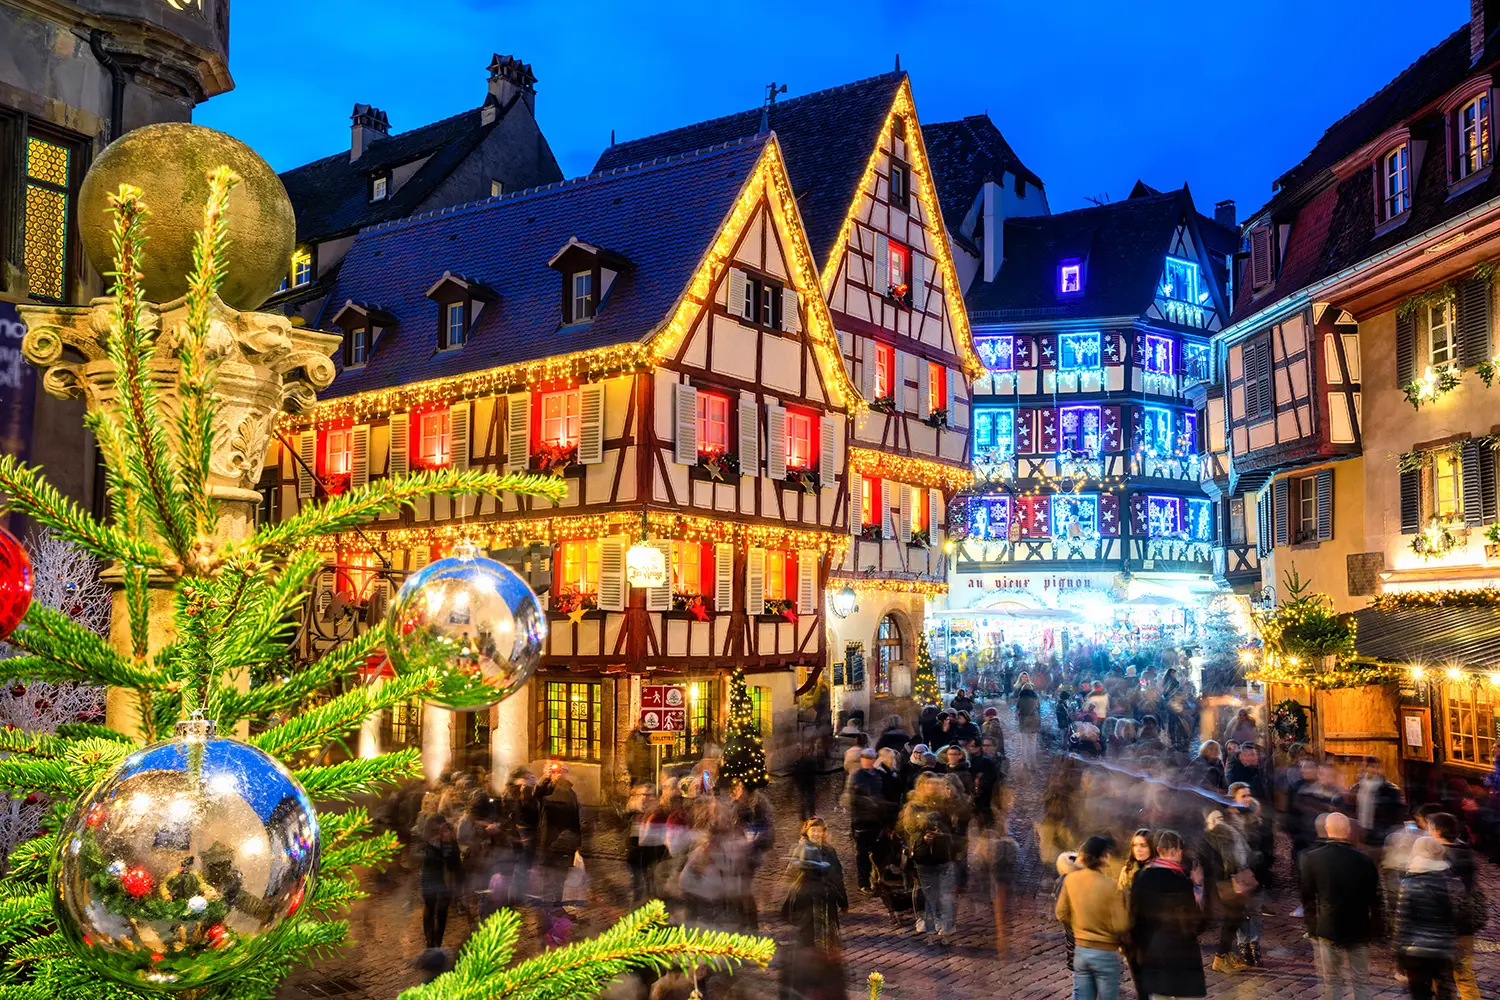 Traditional illuminated Christmas market in the Old town of Colmar, Alsace